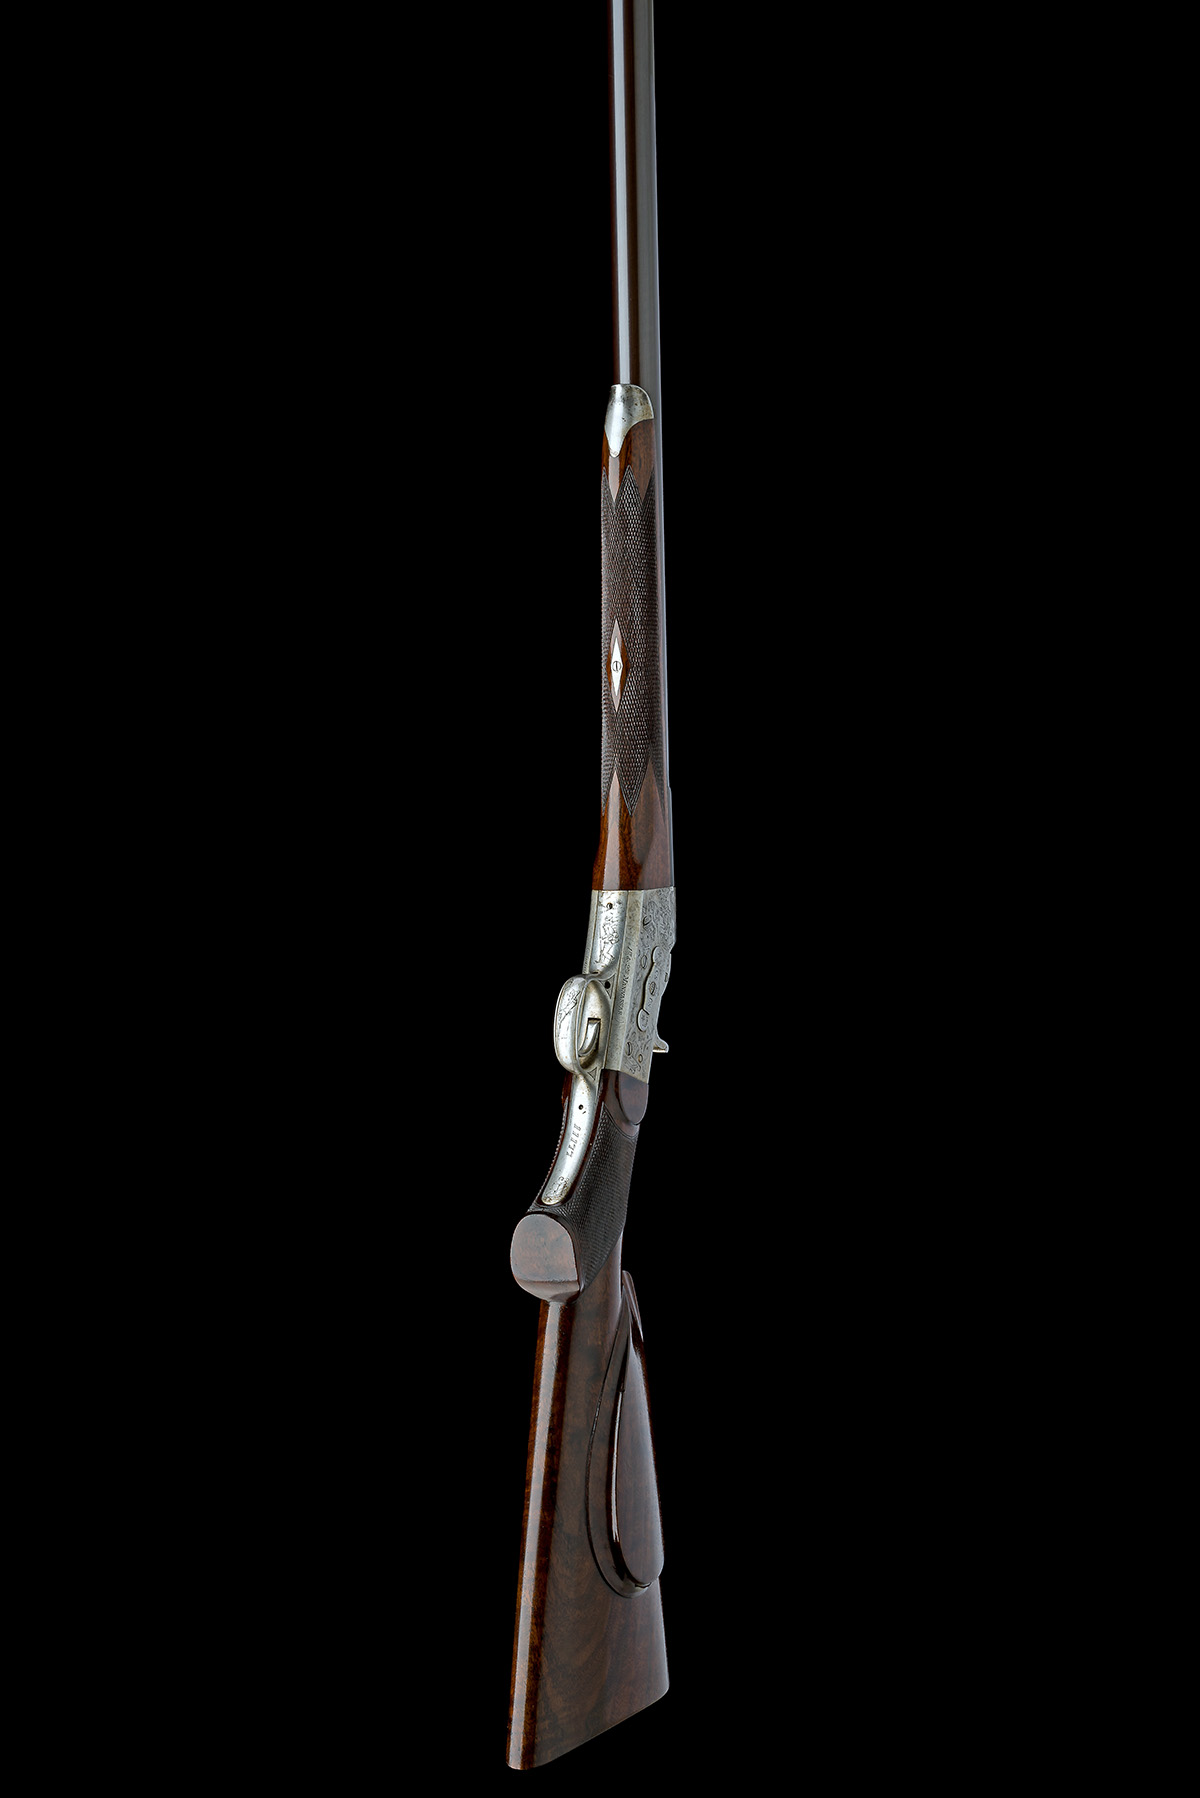 T.A. SMITH A .45-90 CIVIL WAR THEMED ROLLING-BLOCK LONG RANGE TARGET RIFLE, serial no. 11177, - Image 8 of 10